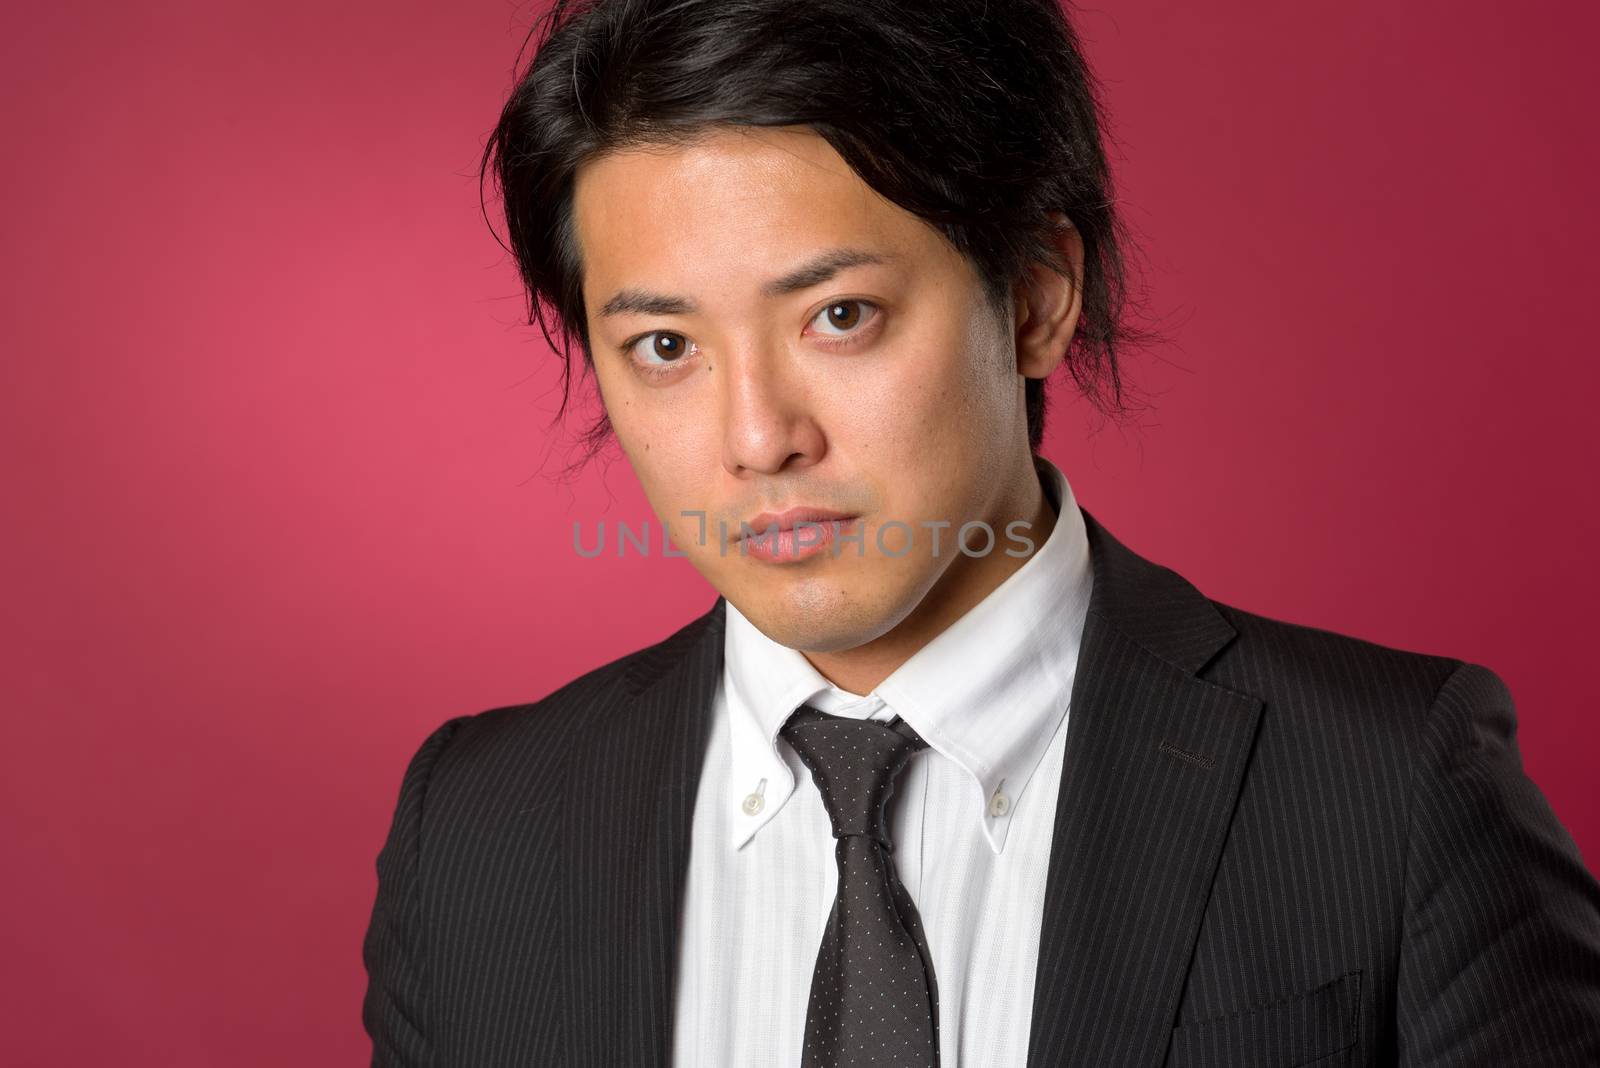 A headshot style portrait of a young Japanese man wearing a business suit with a serious expression on a red background.